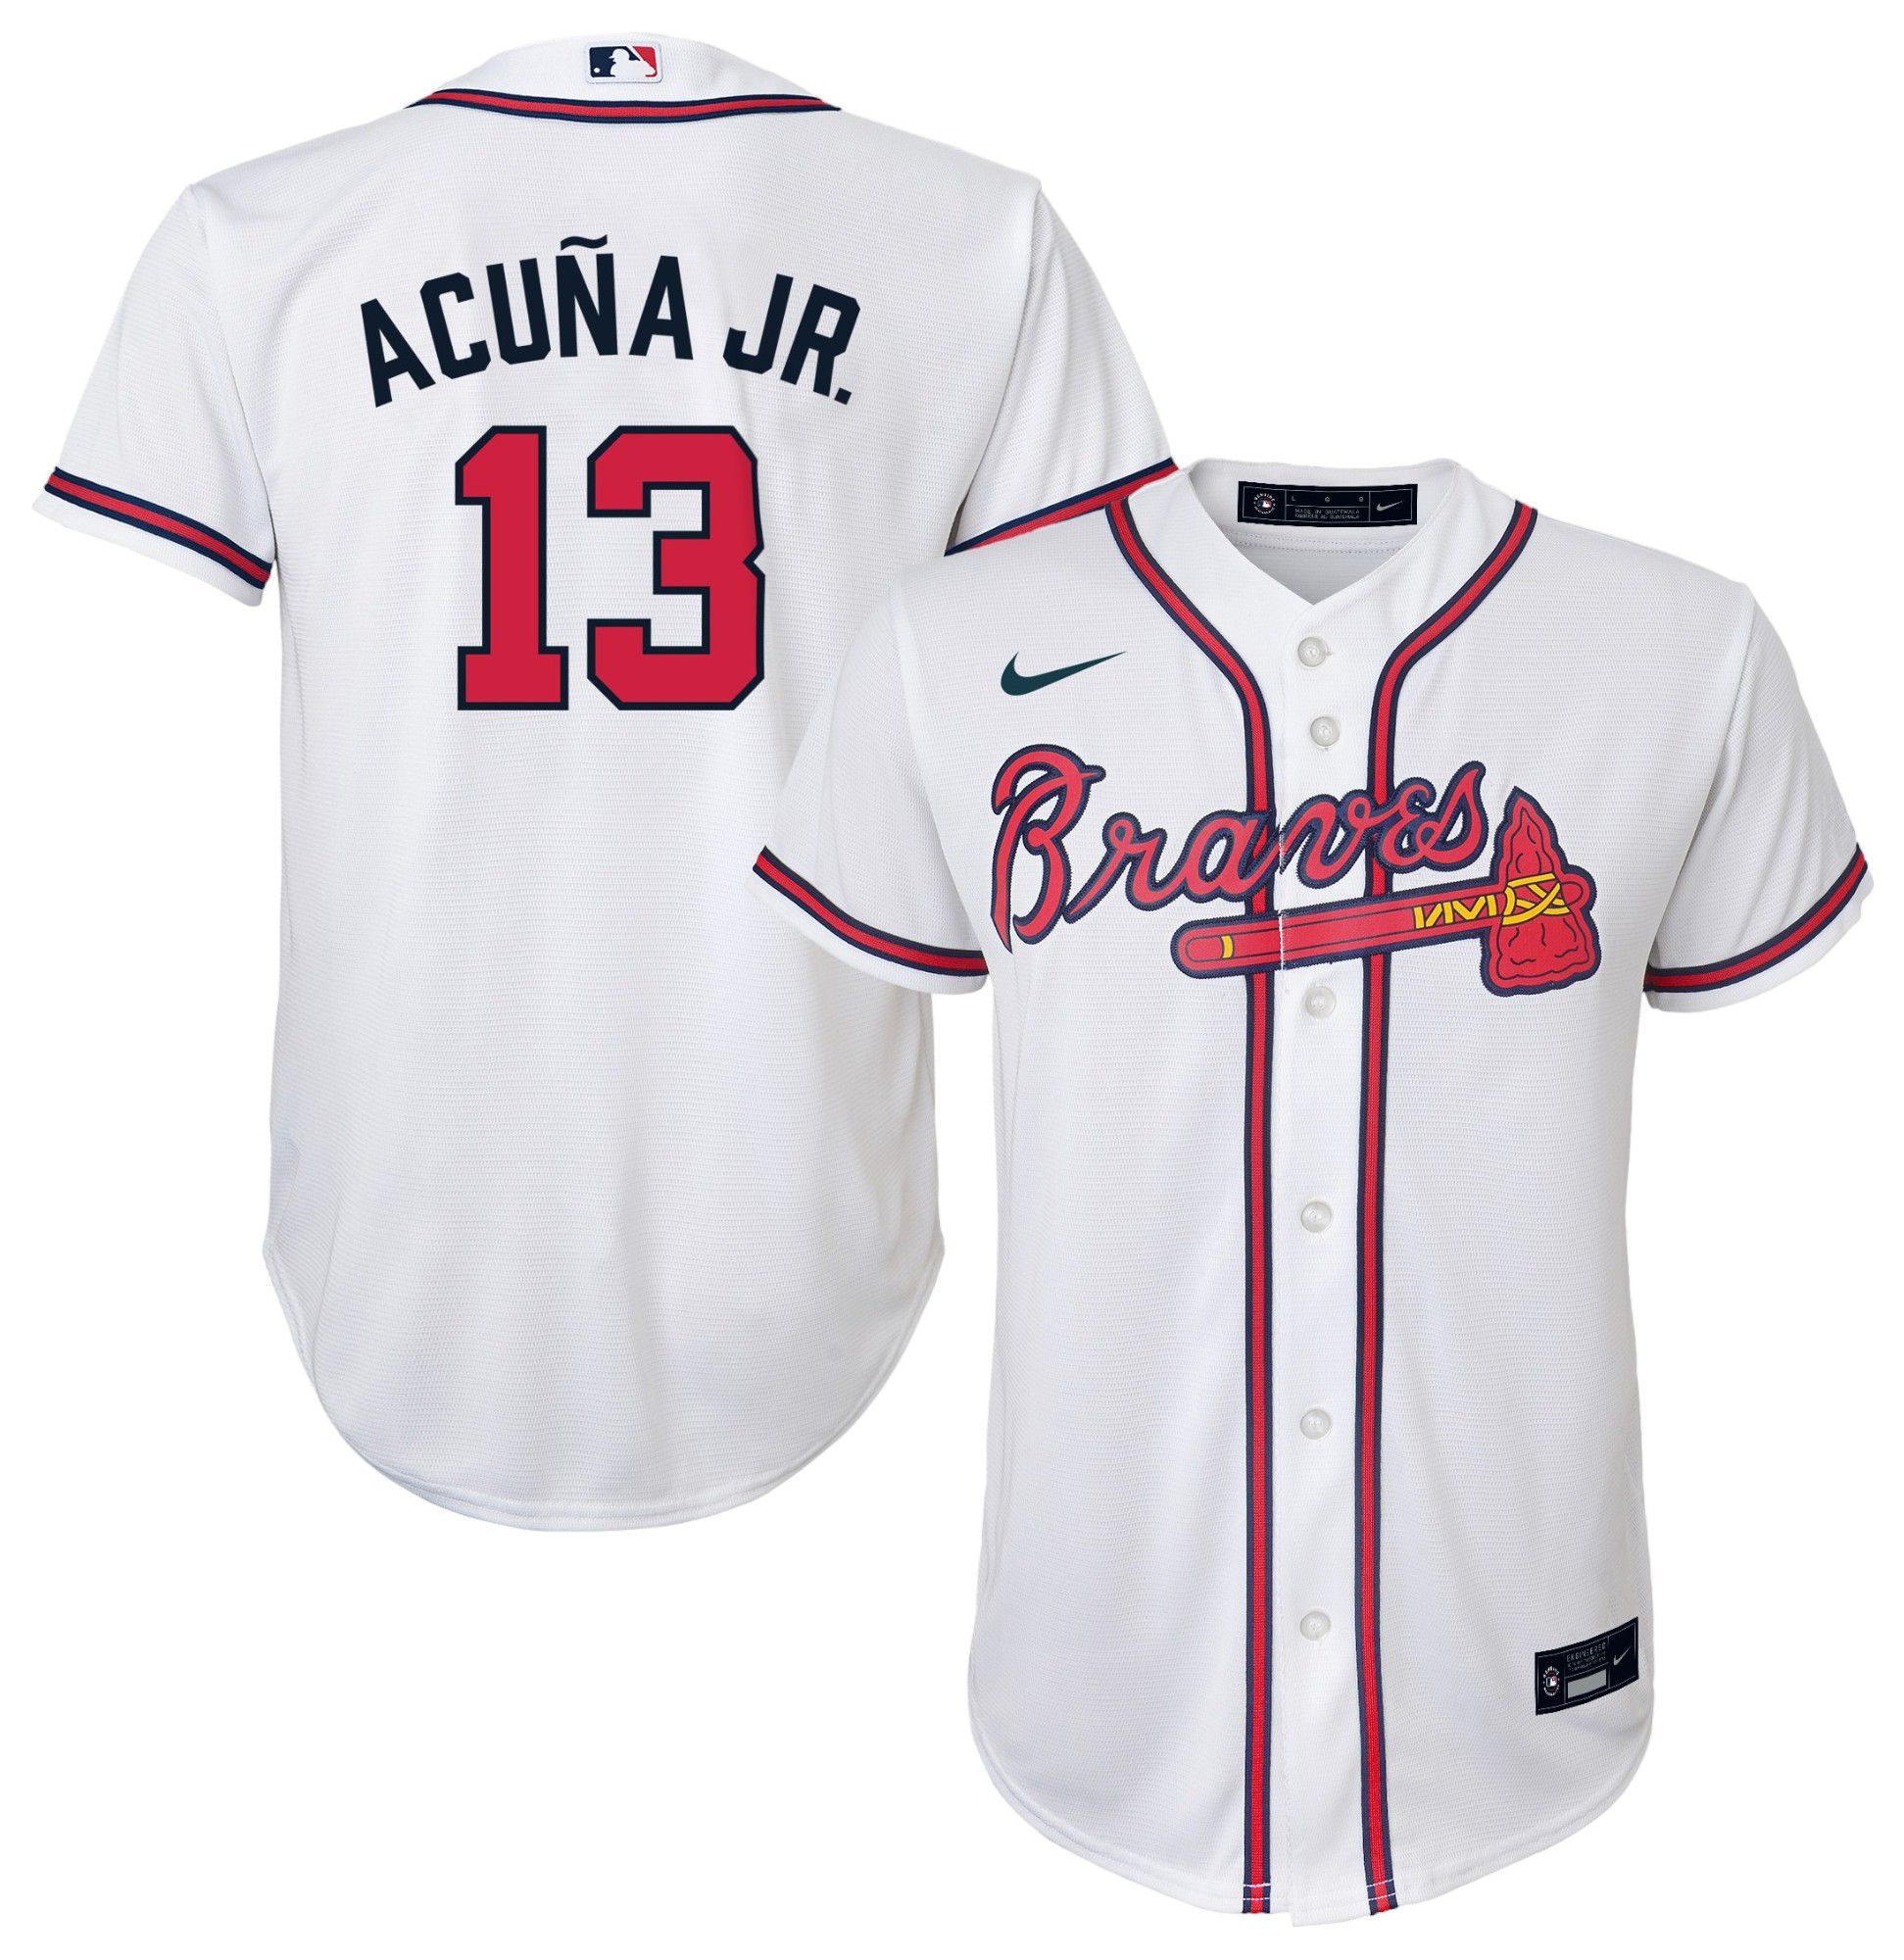 Braves Personalized Authentic Grey Jersey (S-3XL)